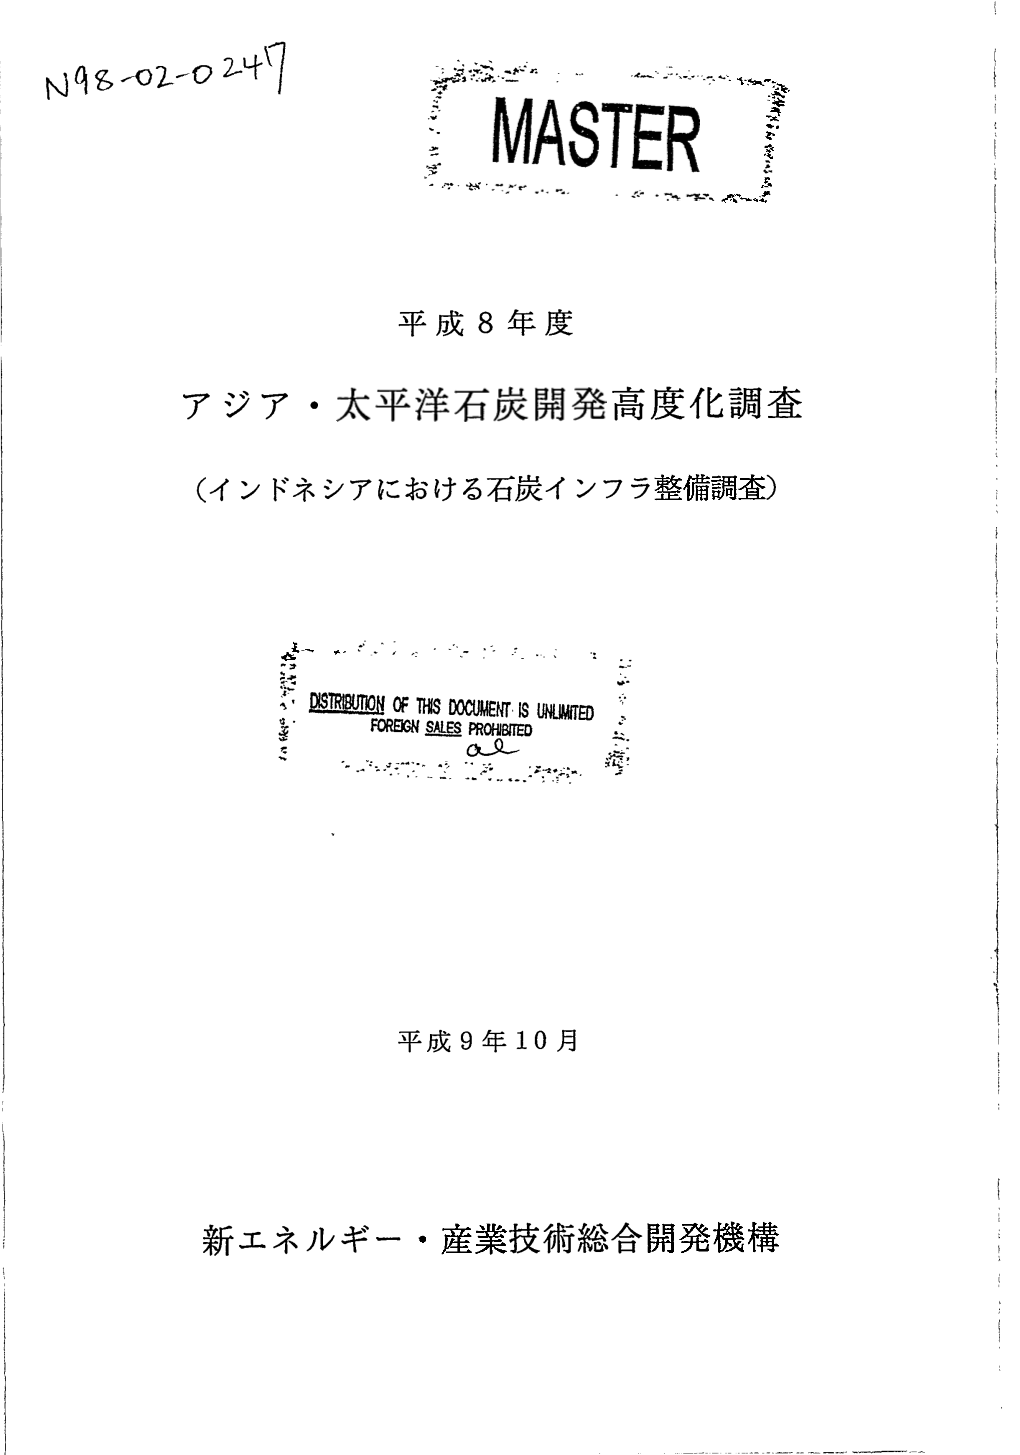 Fiscal 1996 Survey for the Upgrading of the Asia/Pacific Coal